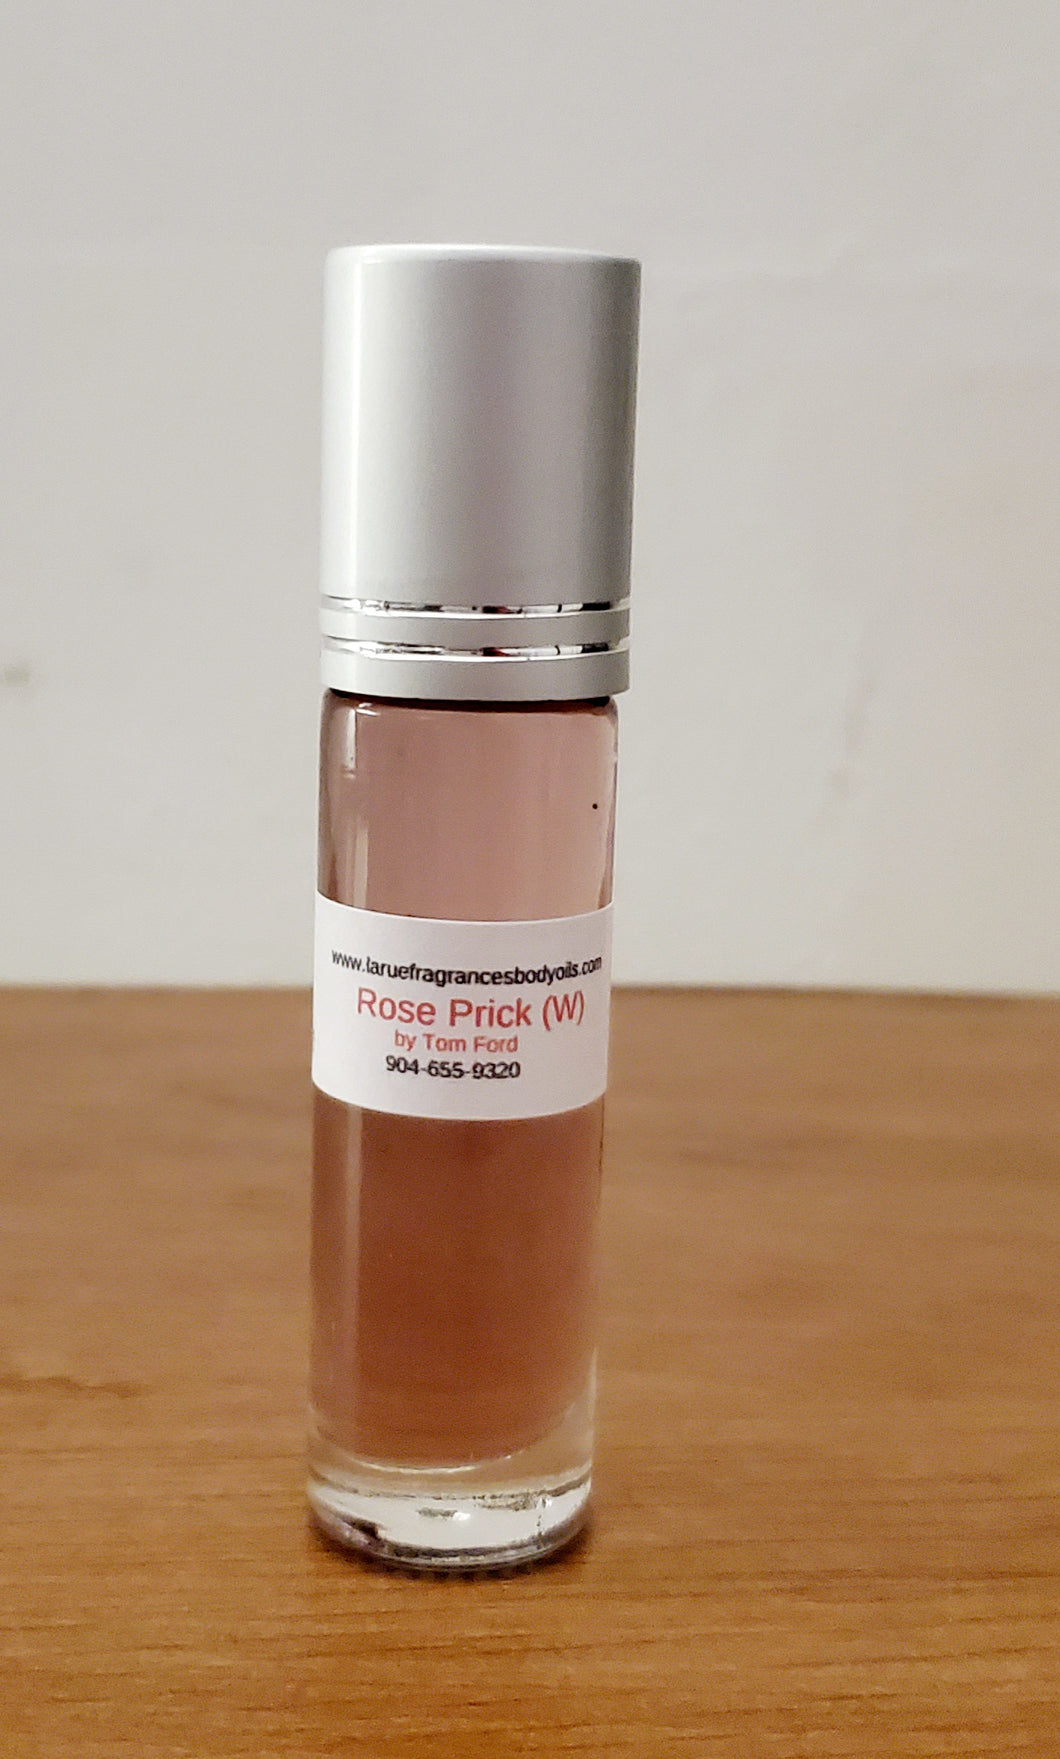 Our Impression Of Rose Prick by Tom Ford (Women)